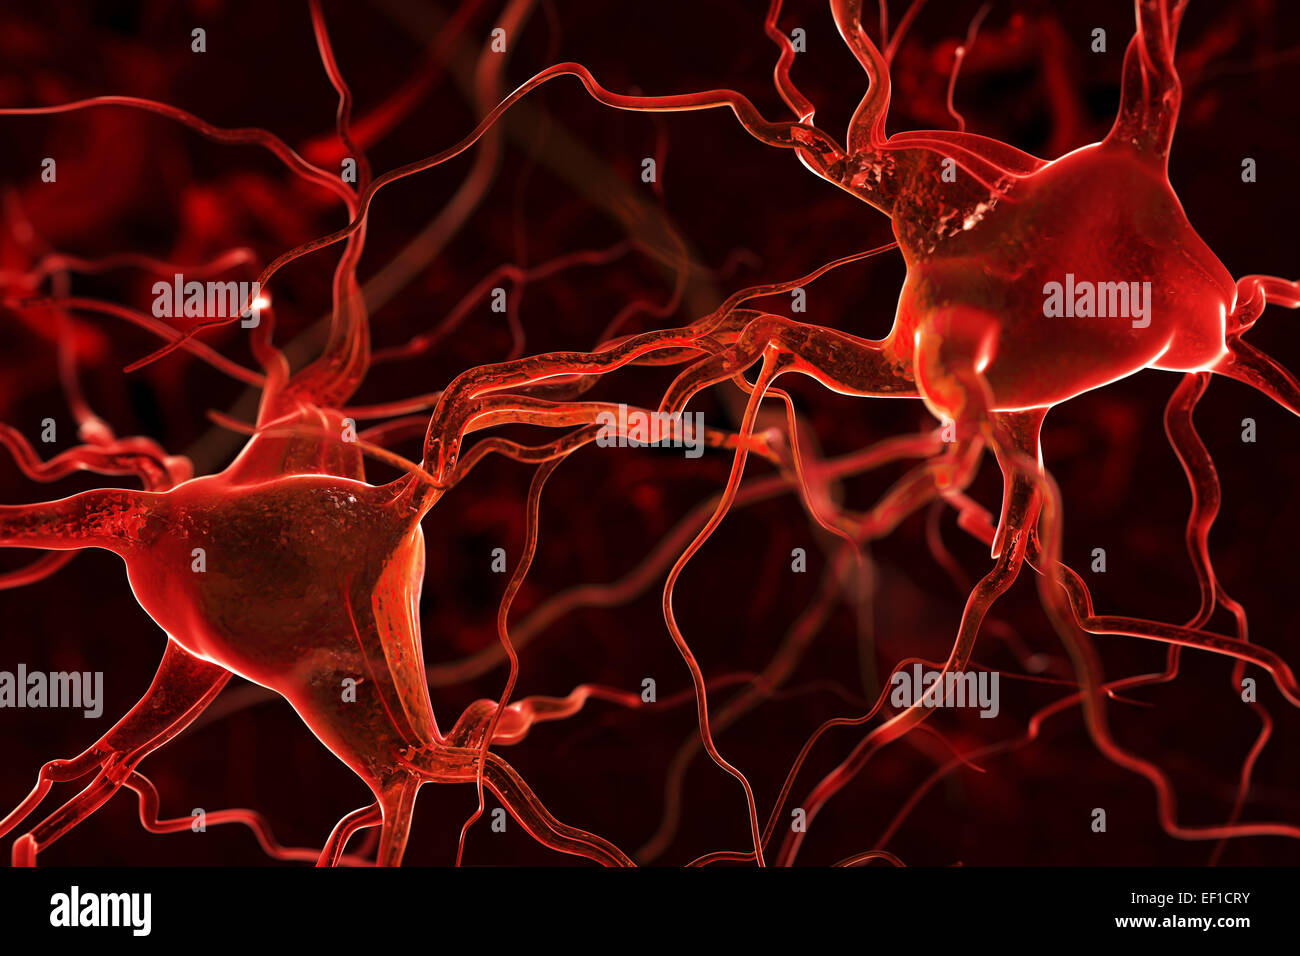 Nerves abstract background Stock Photo